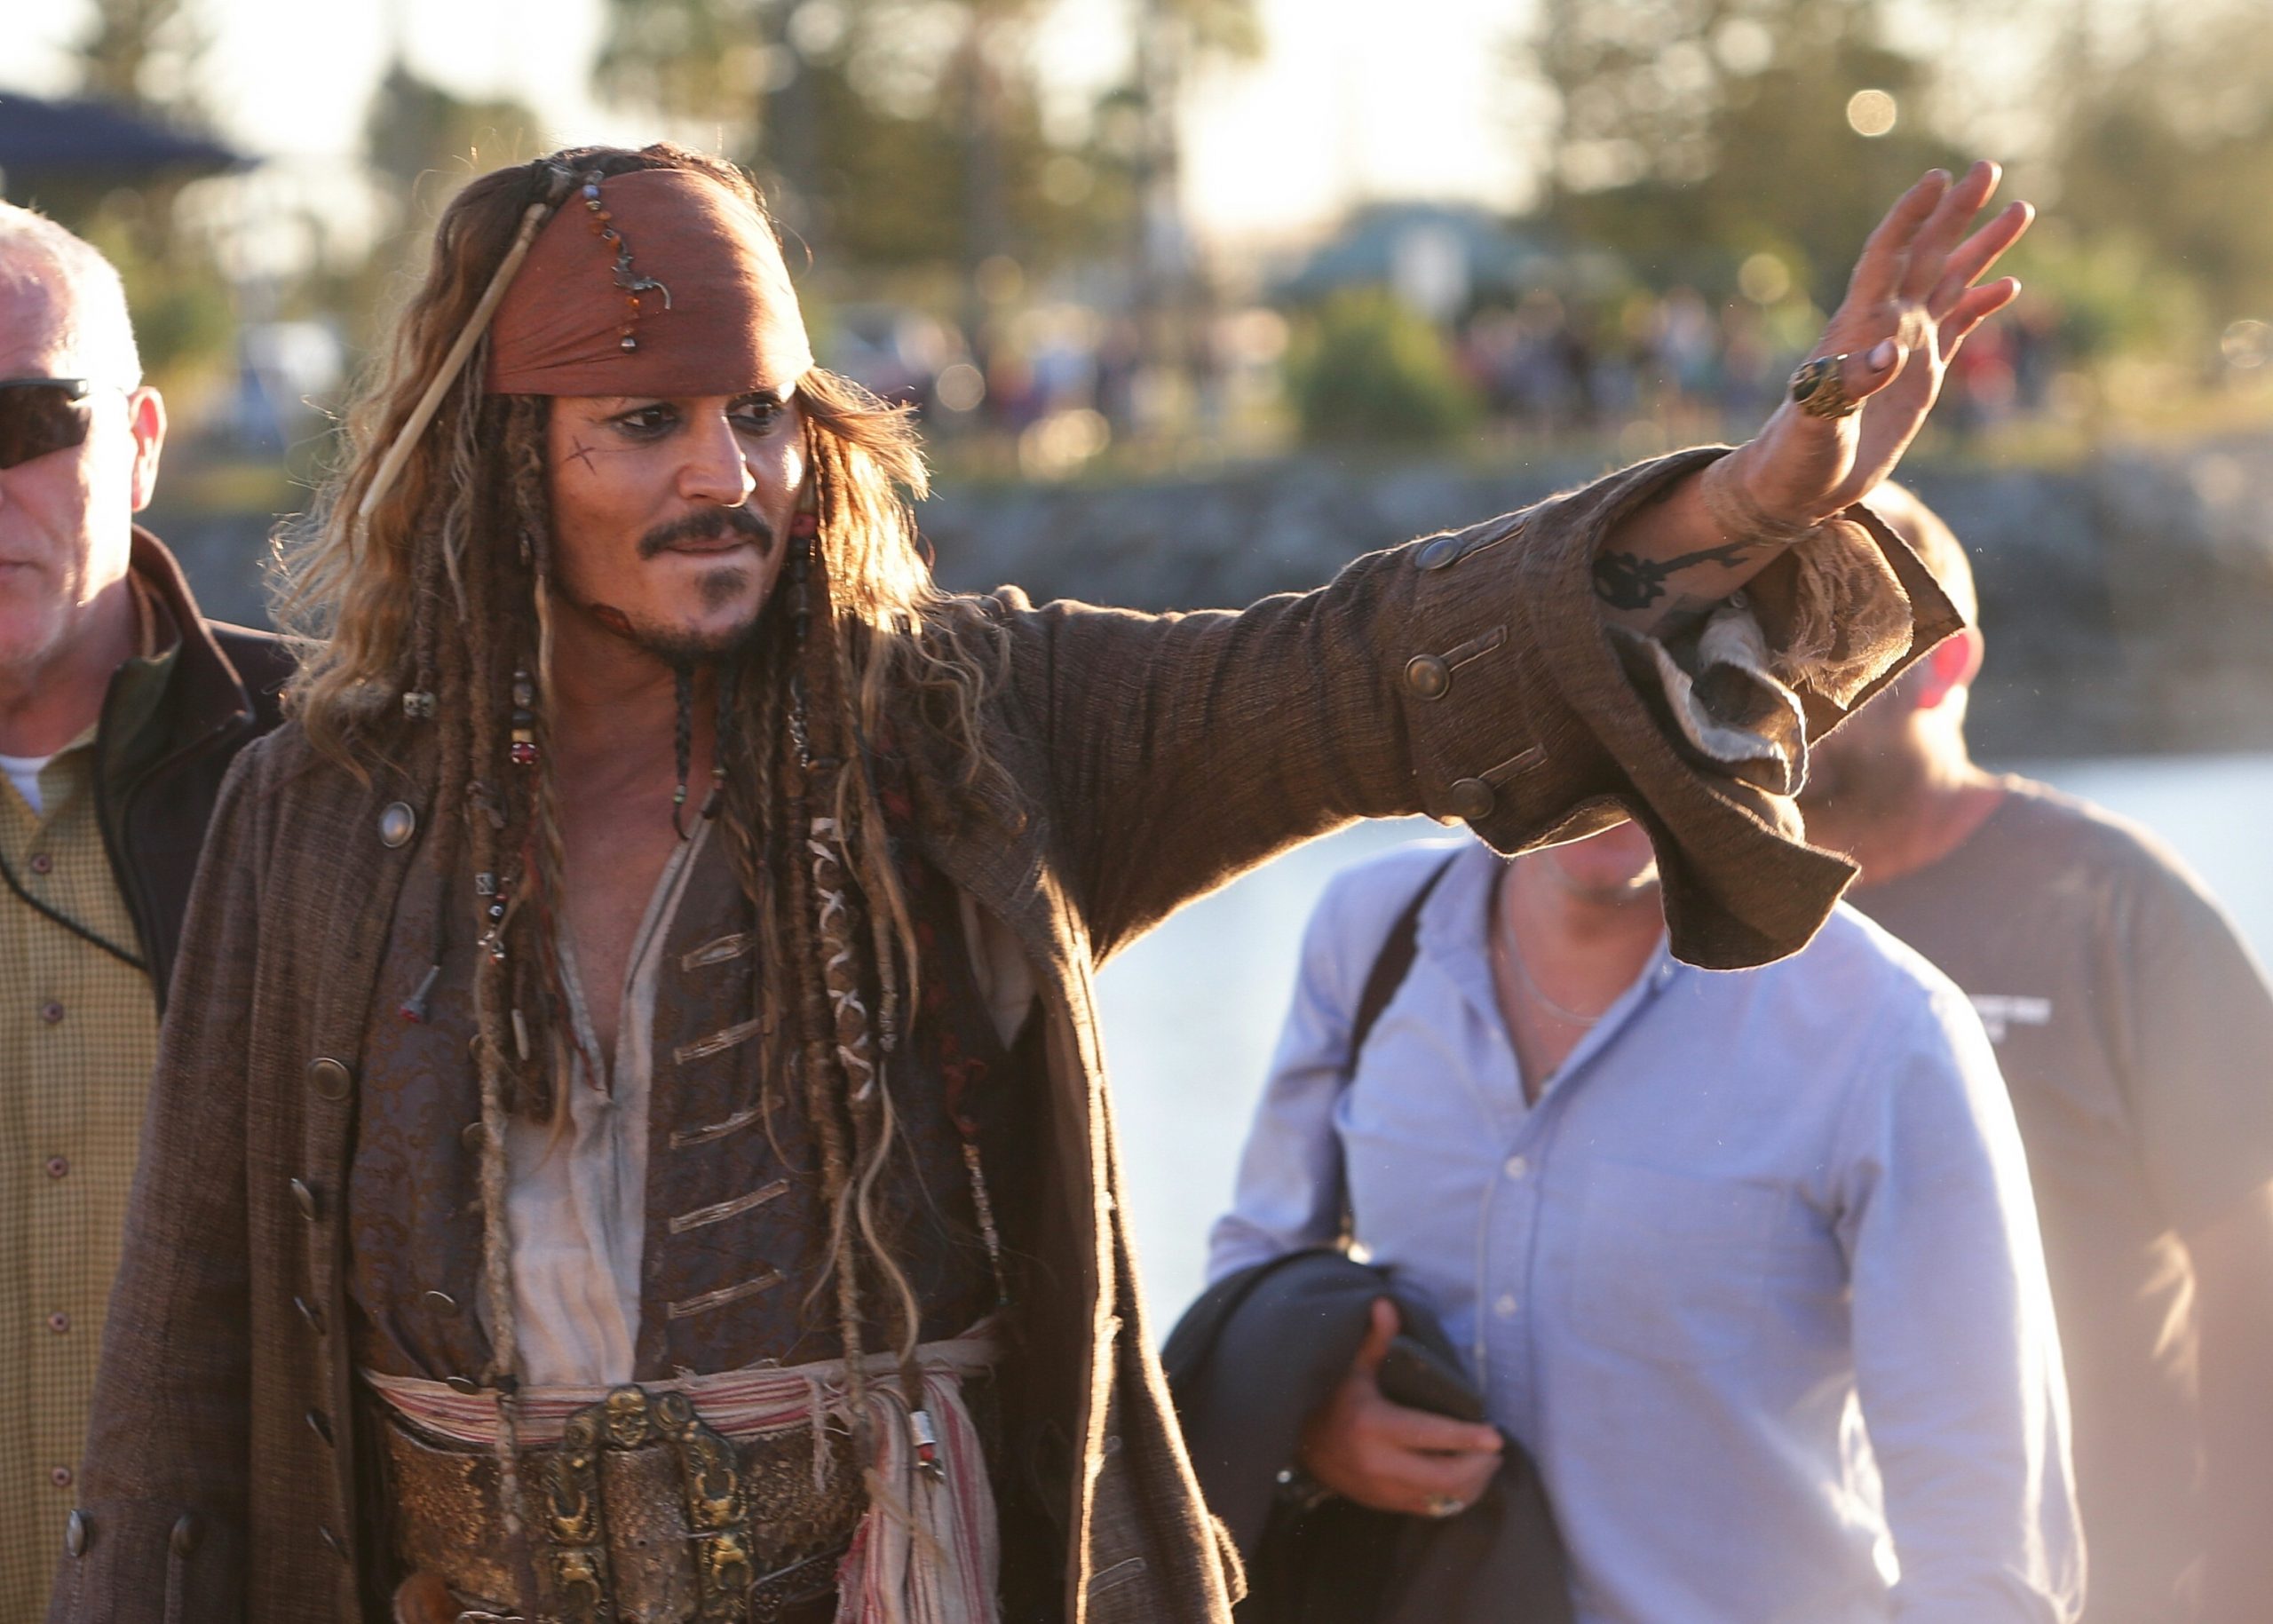 5 Iconic Jack Sparrow Quotes from the 'Pirates of the Caribbean' Franchise